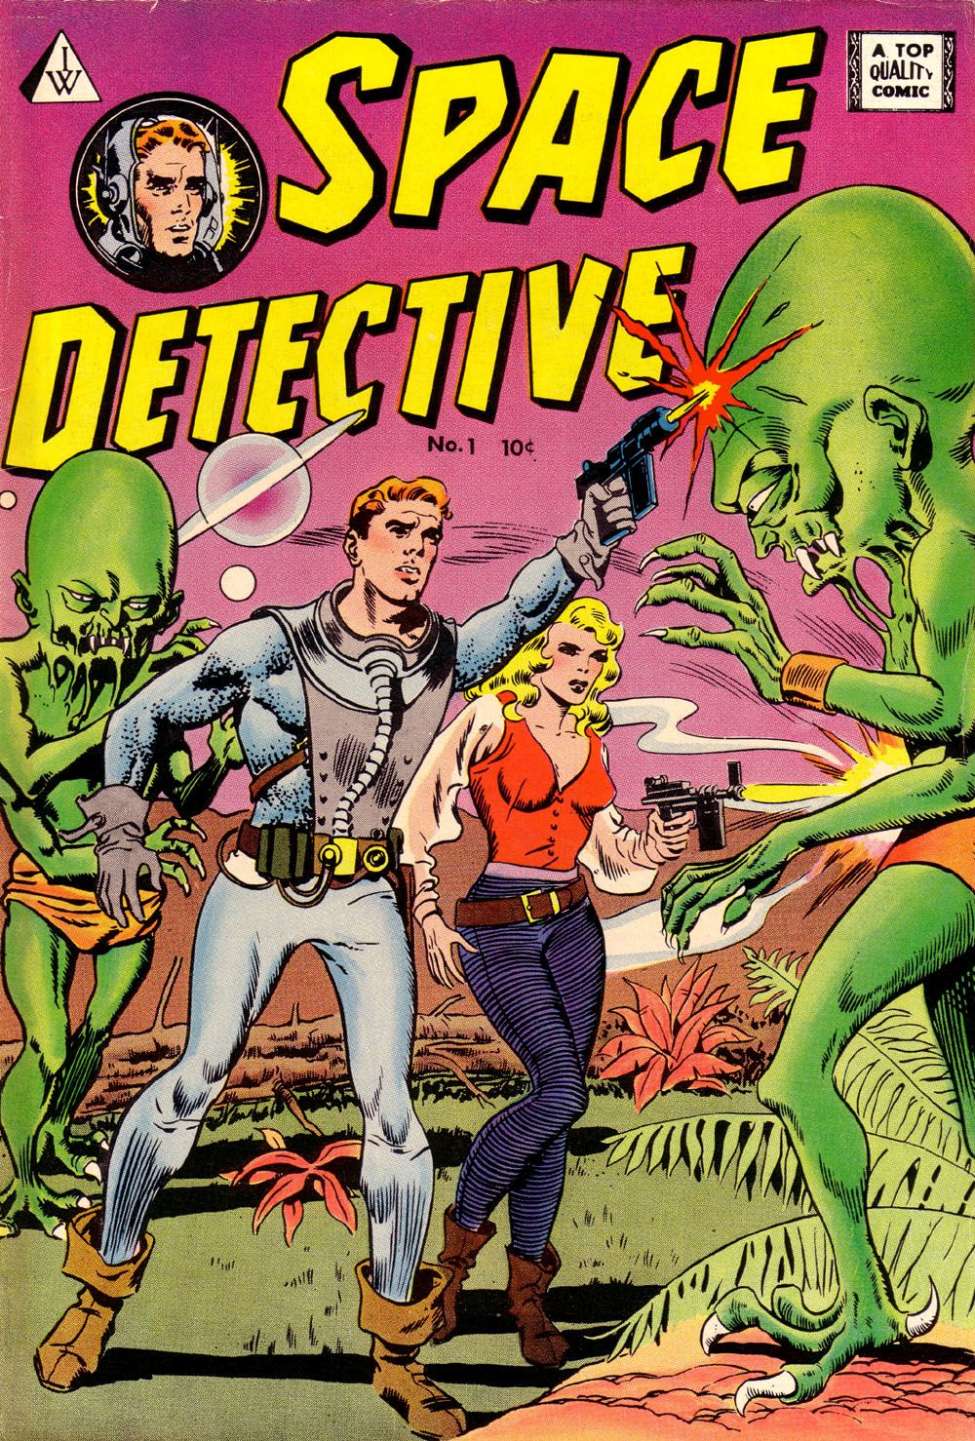 Book Cover For Space Detective 1 - Version 2